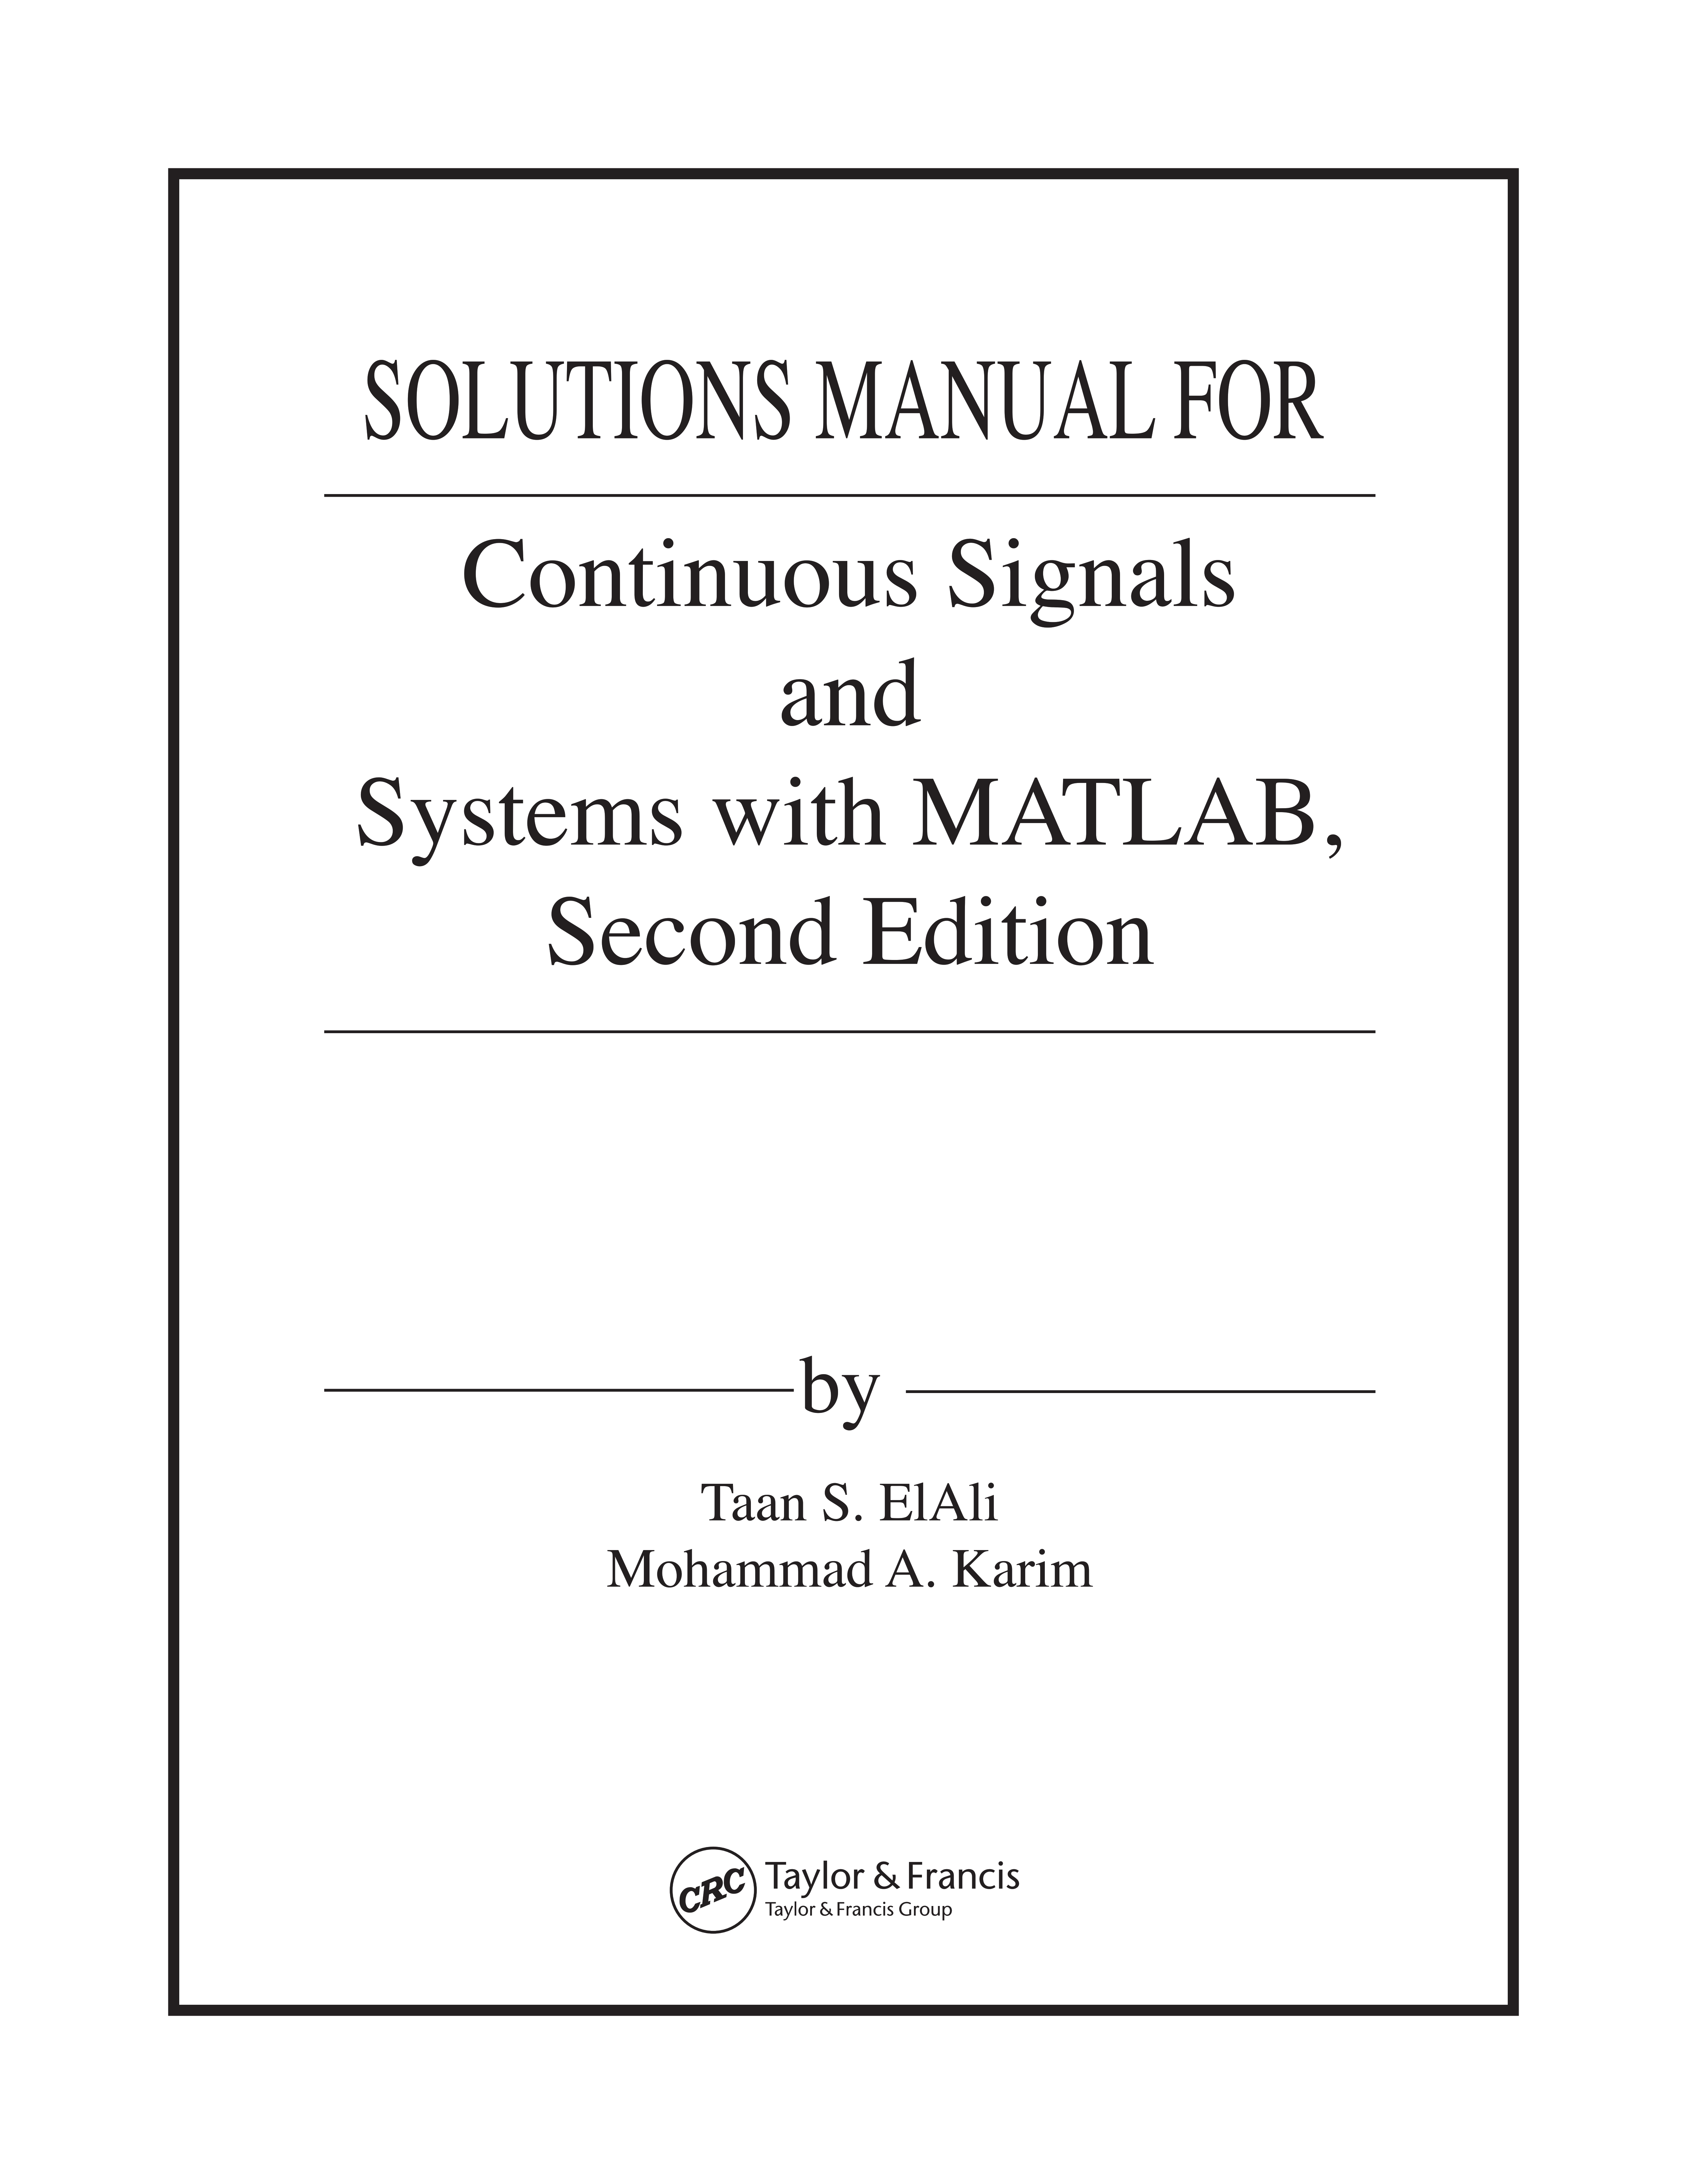 Download free Continuous signals and systems with Matlab Taan Elali & Mohammad A. Karim 2nd edition solutions manual pdf | solution